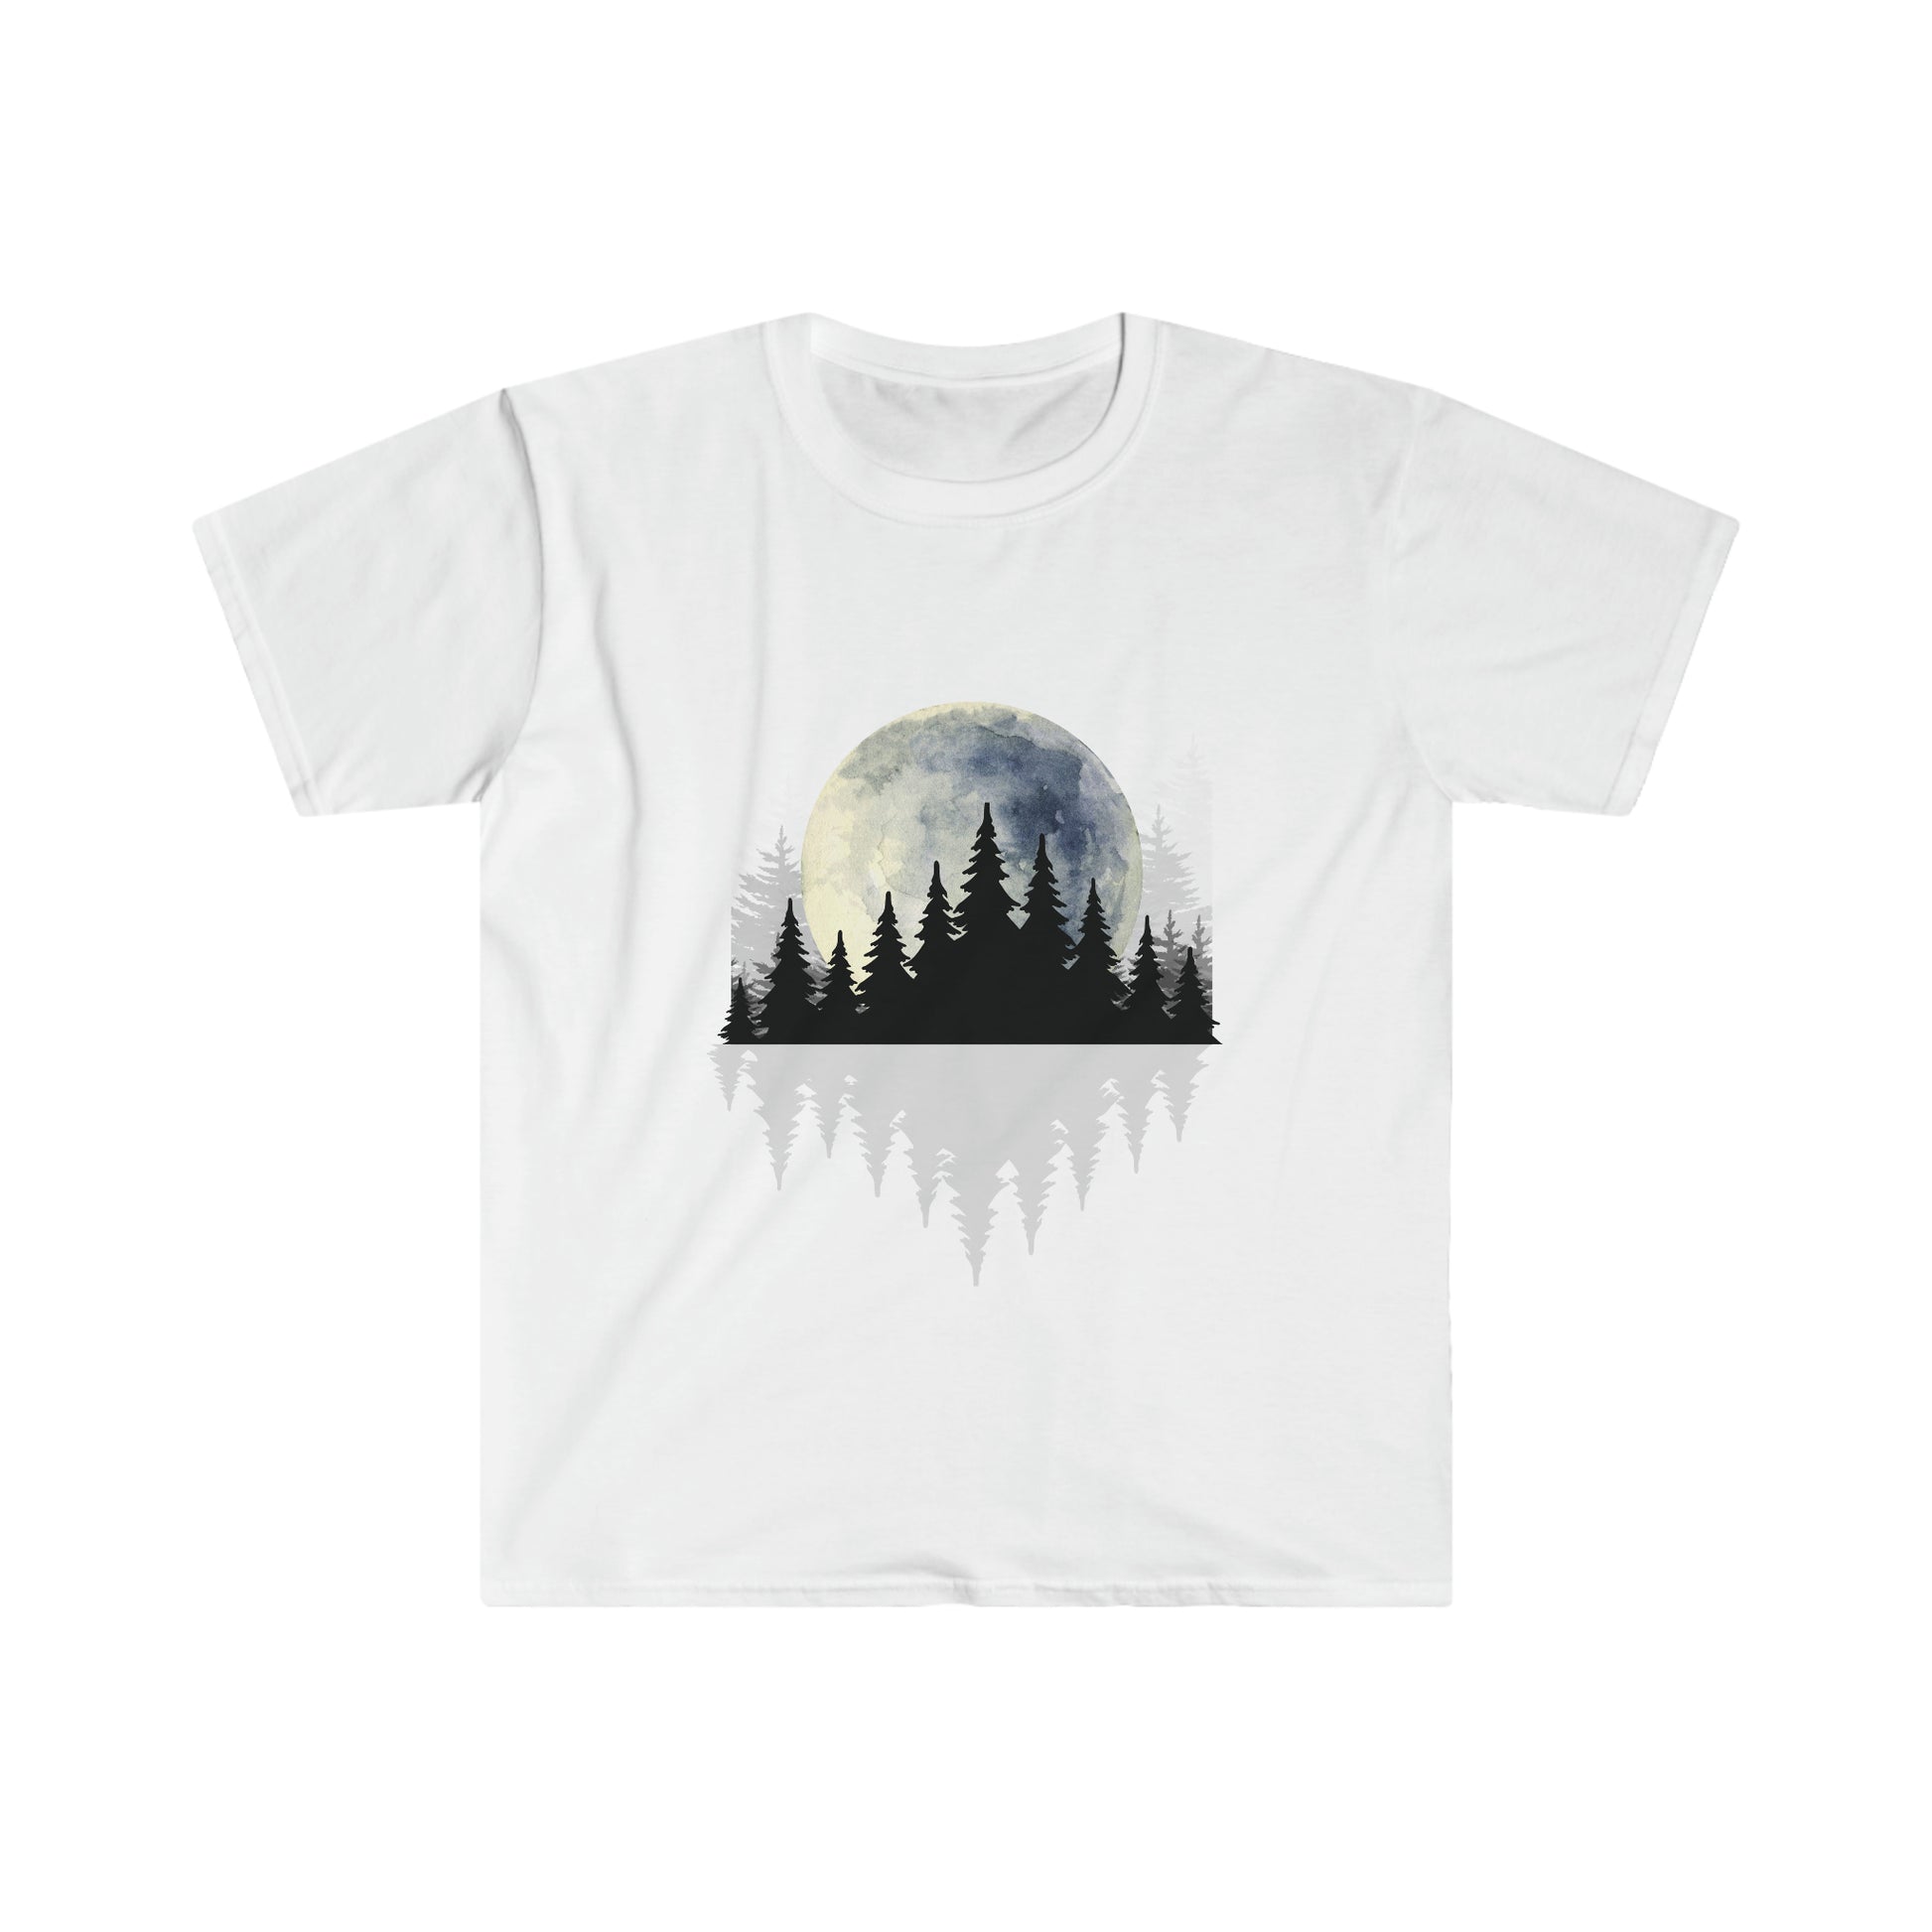 Full Moon Beyond The Forest - Urban Camper